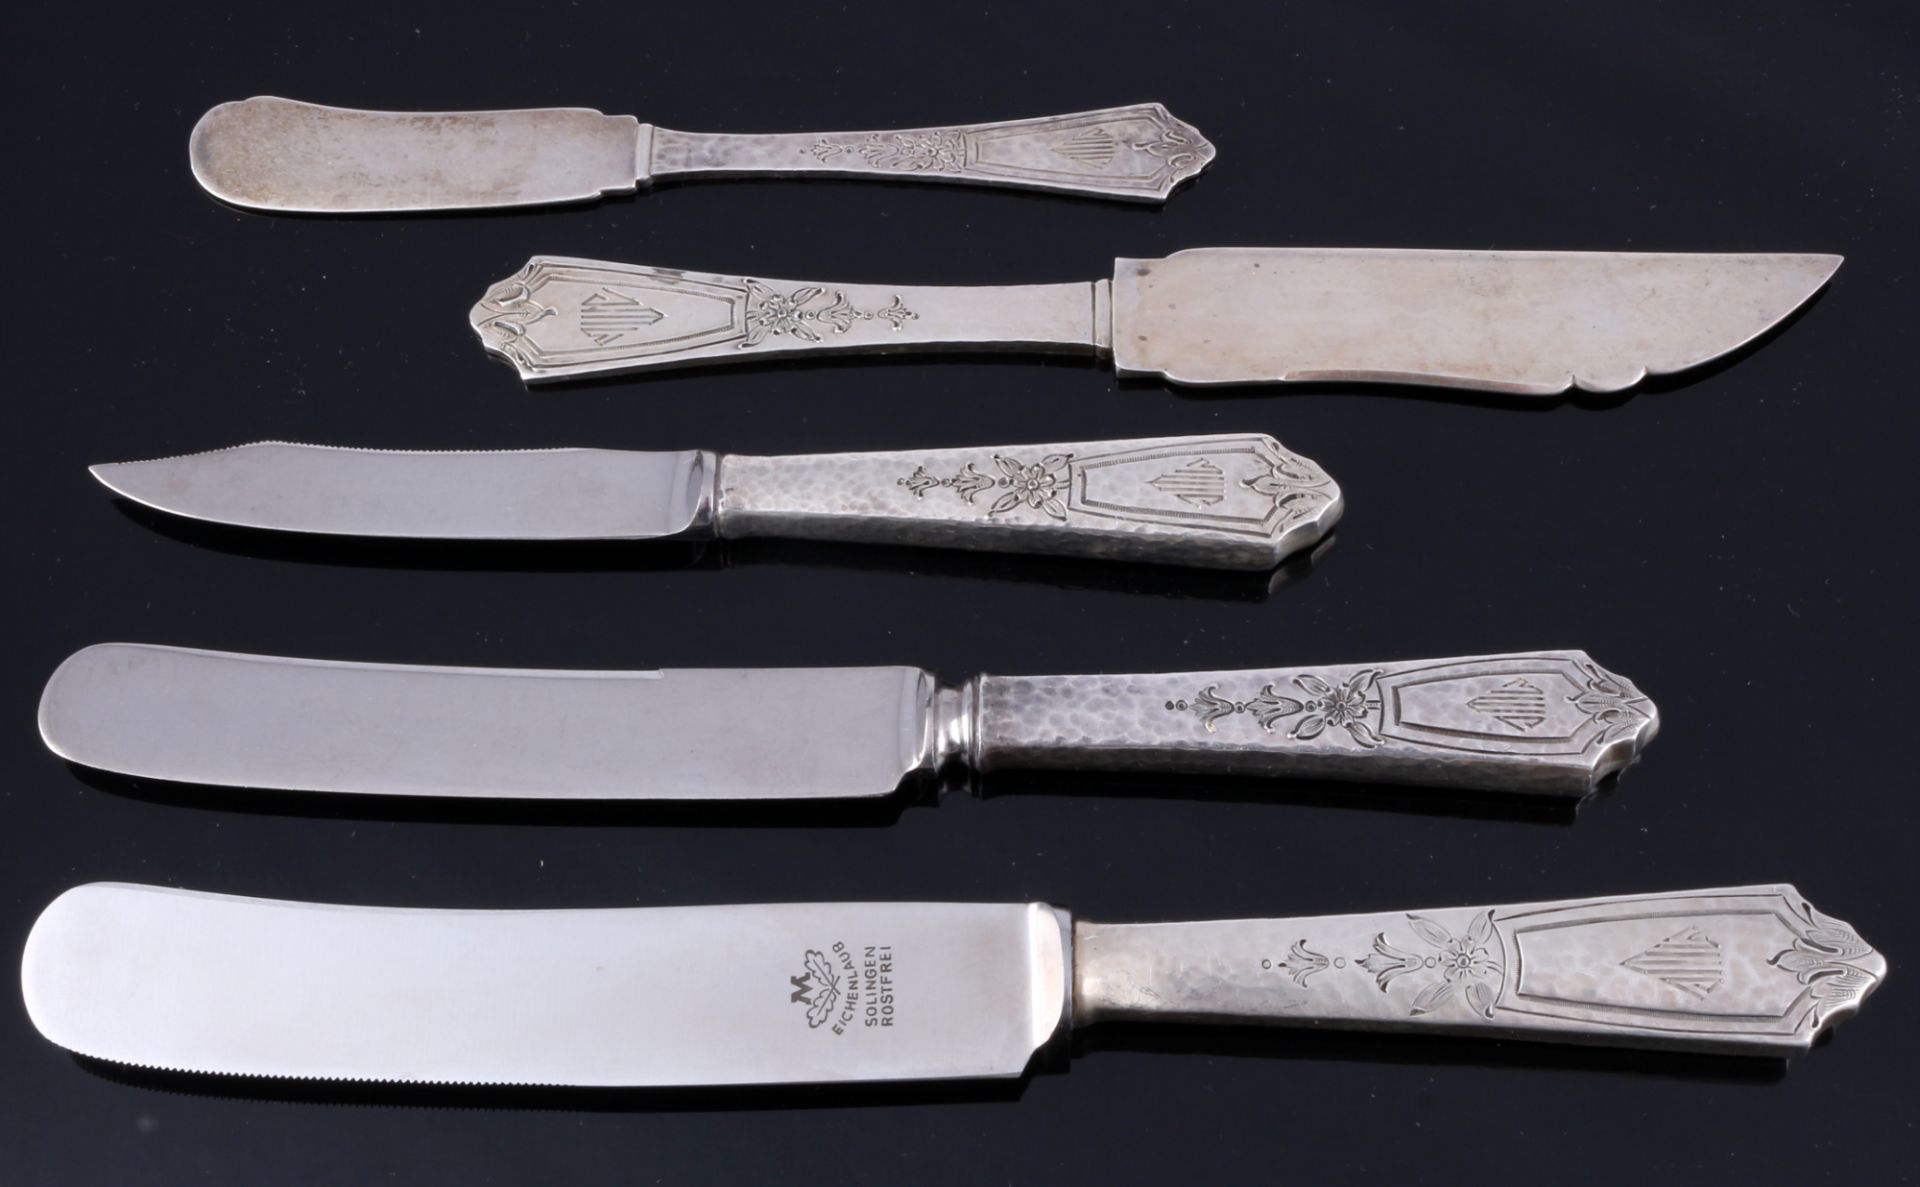 Gorham 925 Silber umfangreiches Besteck 1920/1930, extensive sterling silver cutlery set, - Image 7 of 13